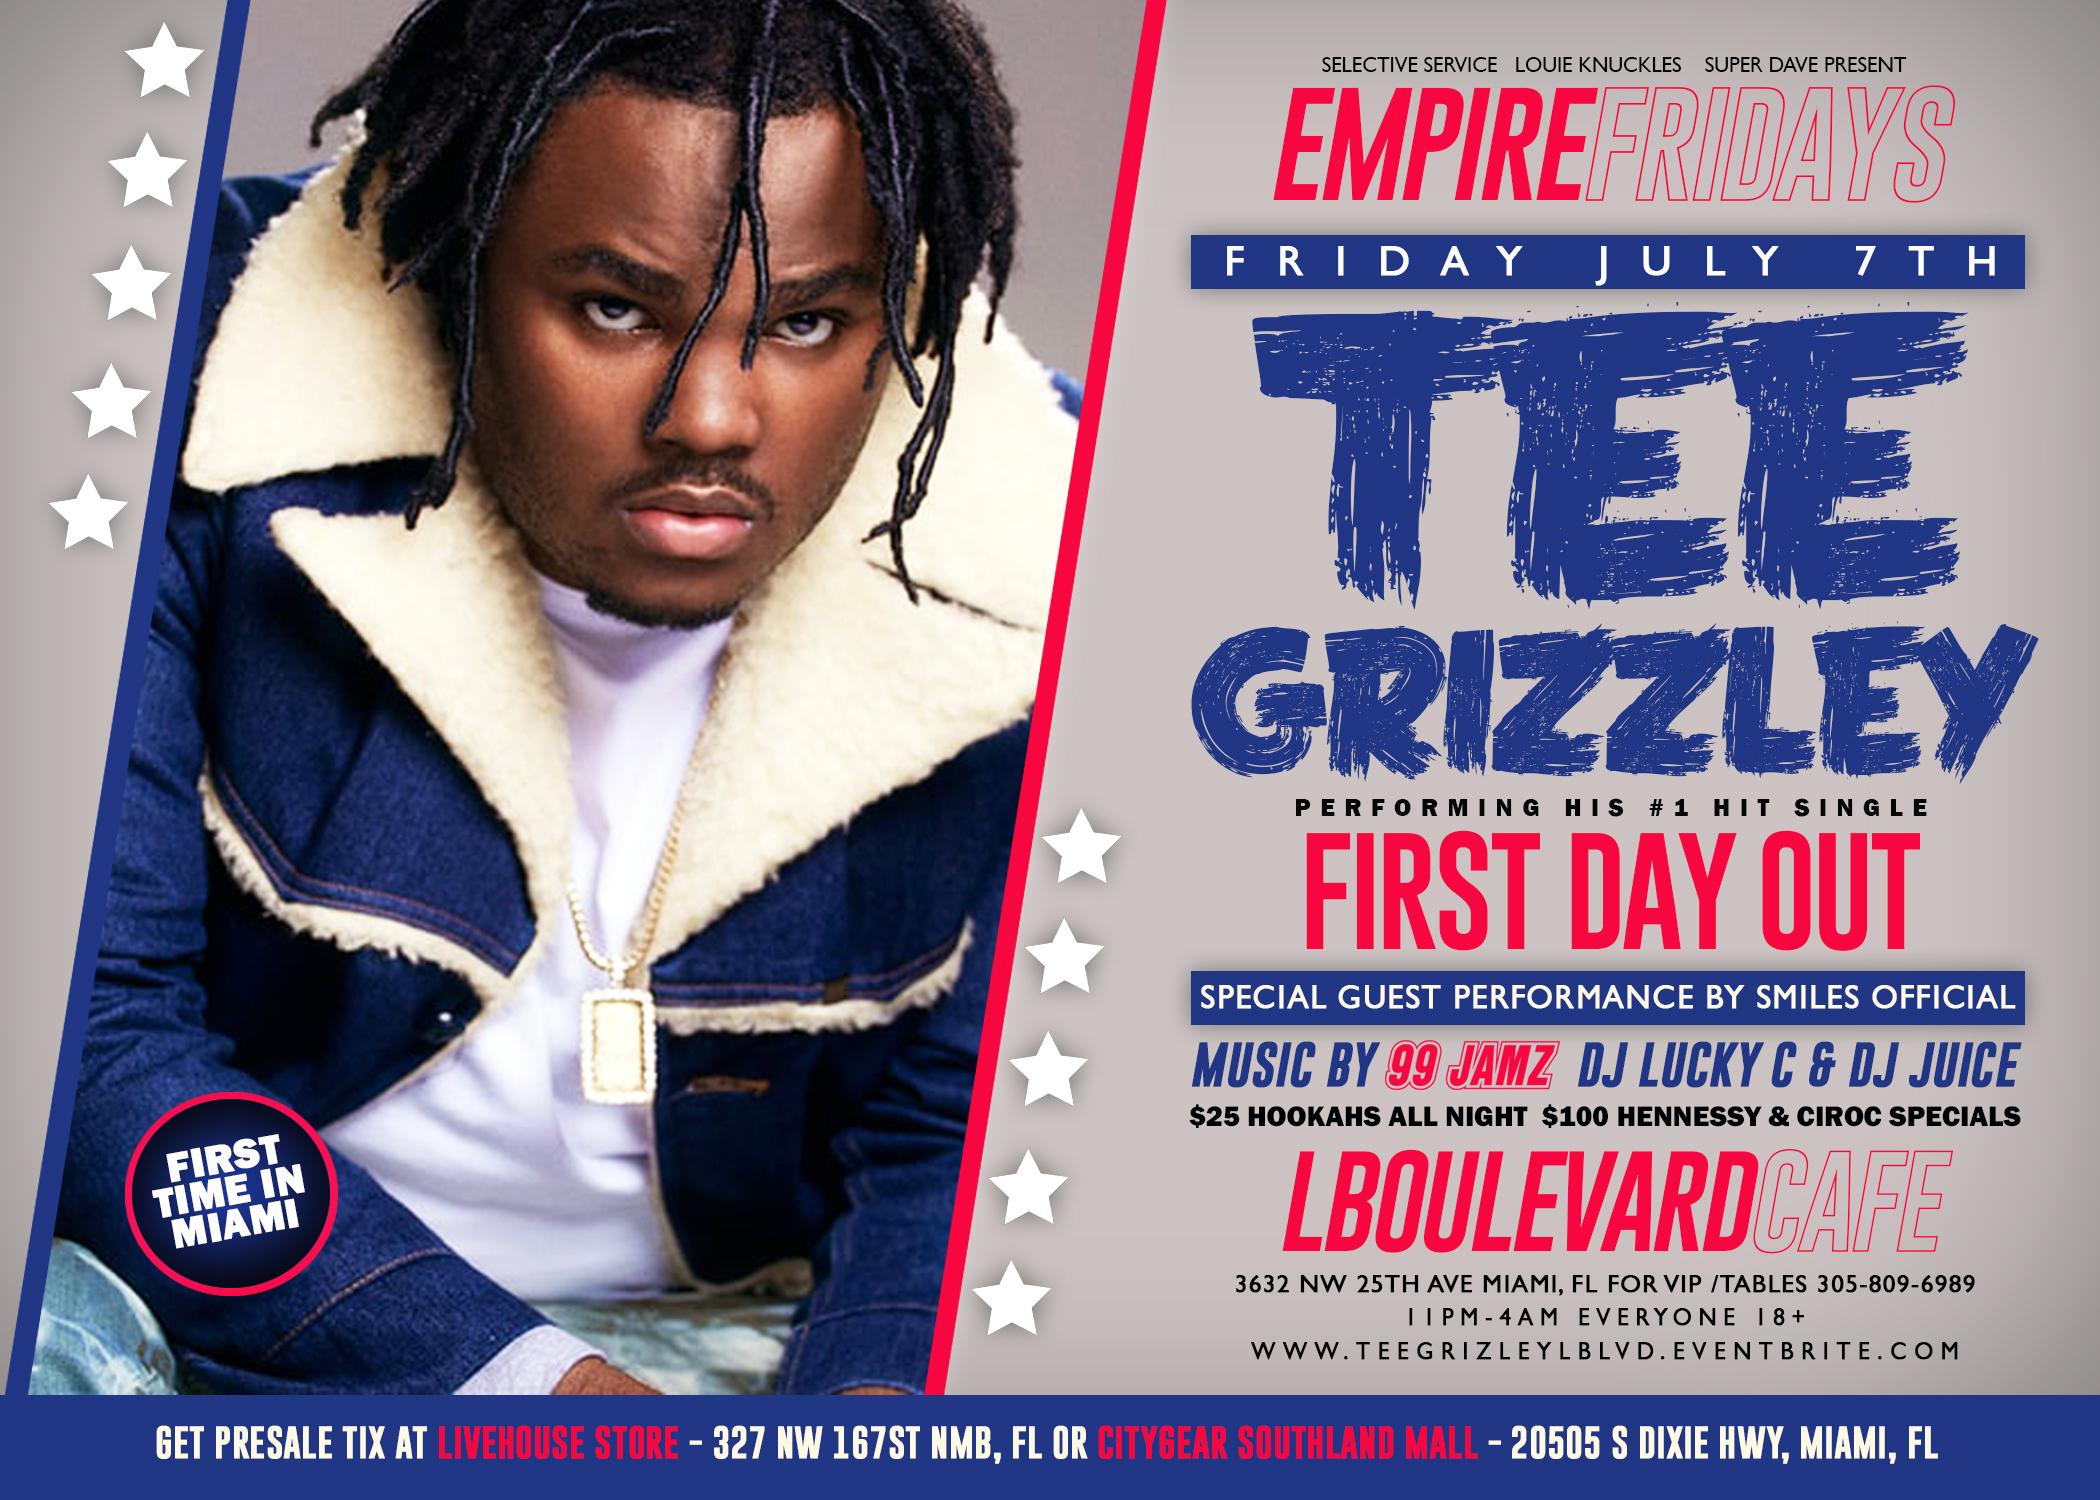 TEE GRIZZLEY at L'Boulevard Cafe Miami